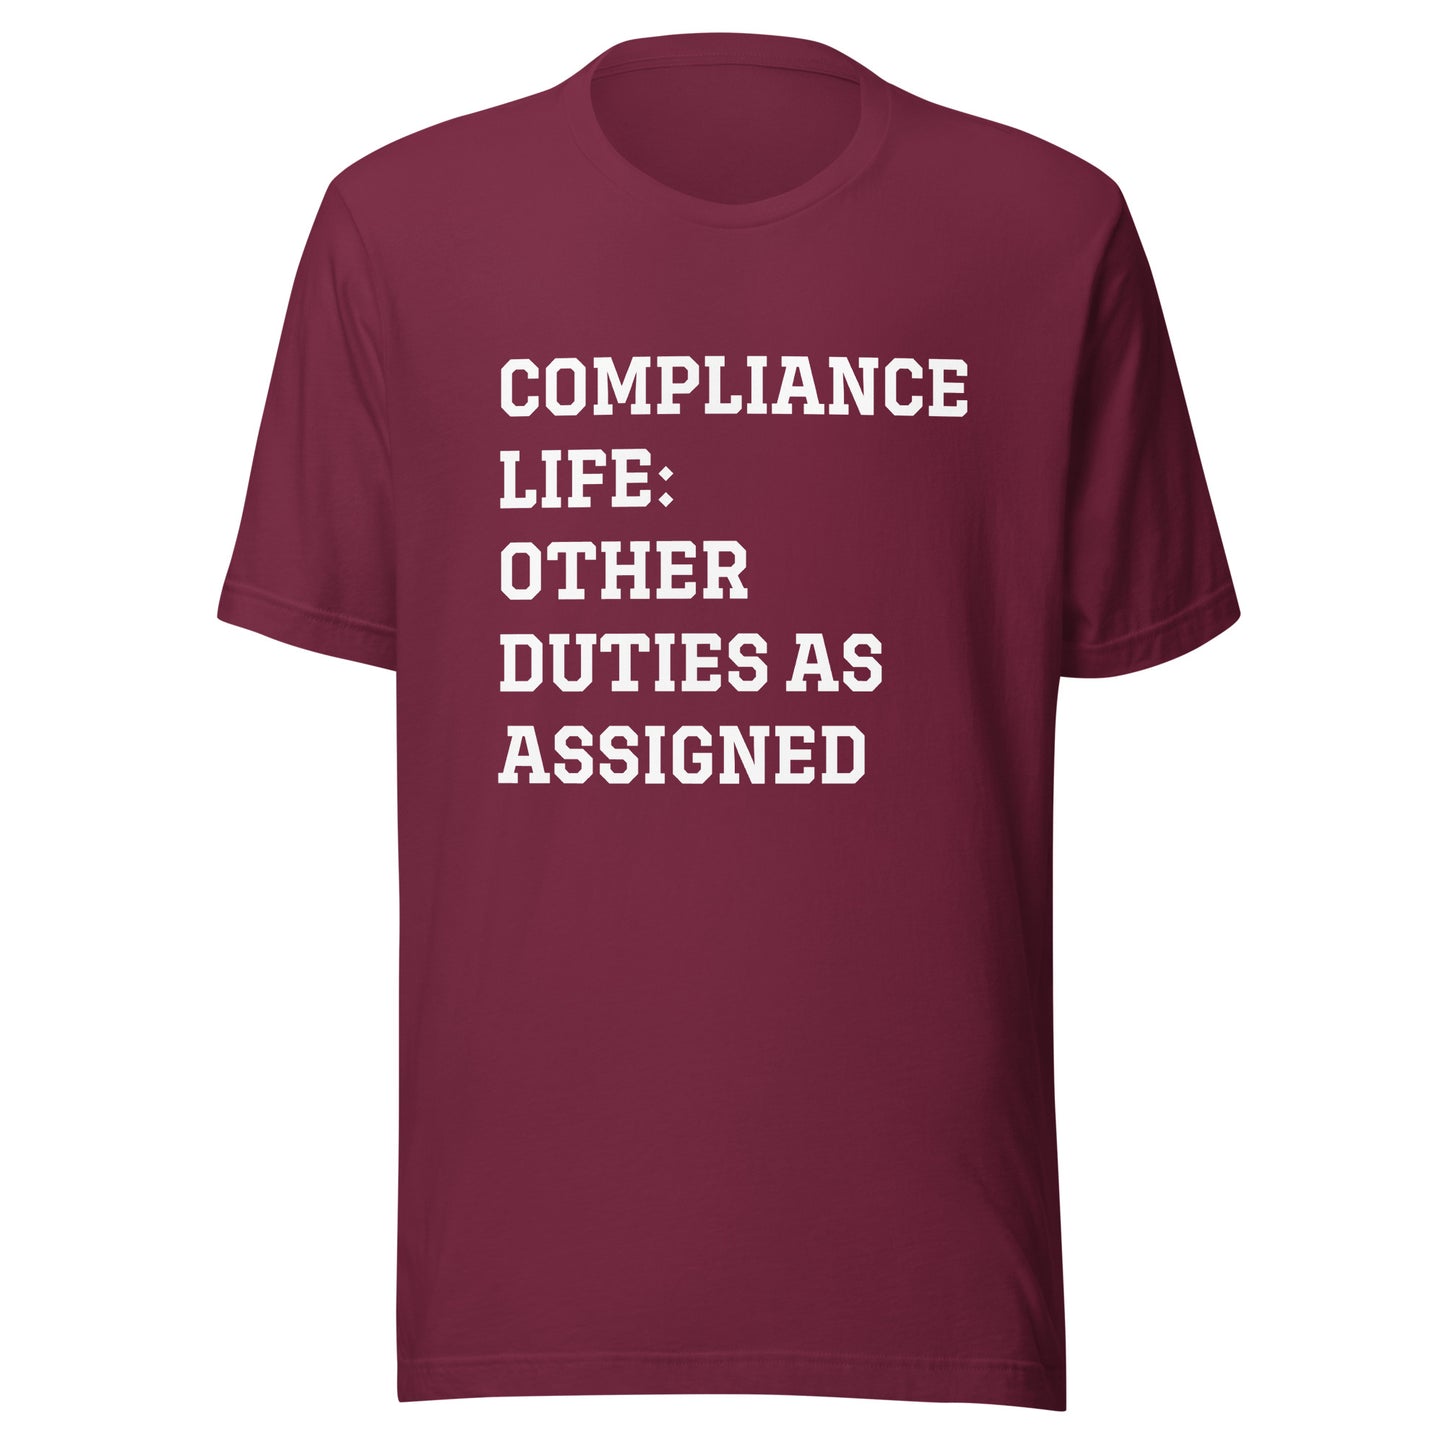 Compliance Life: Other Duties as Assigned